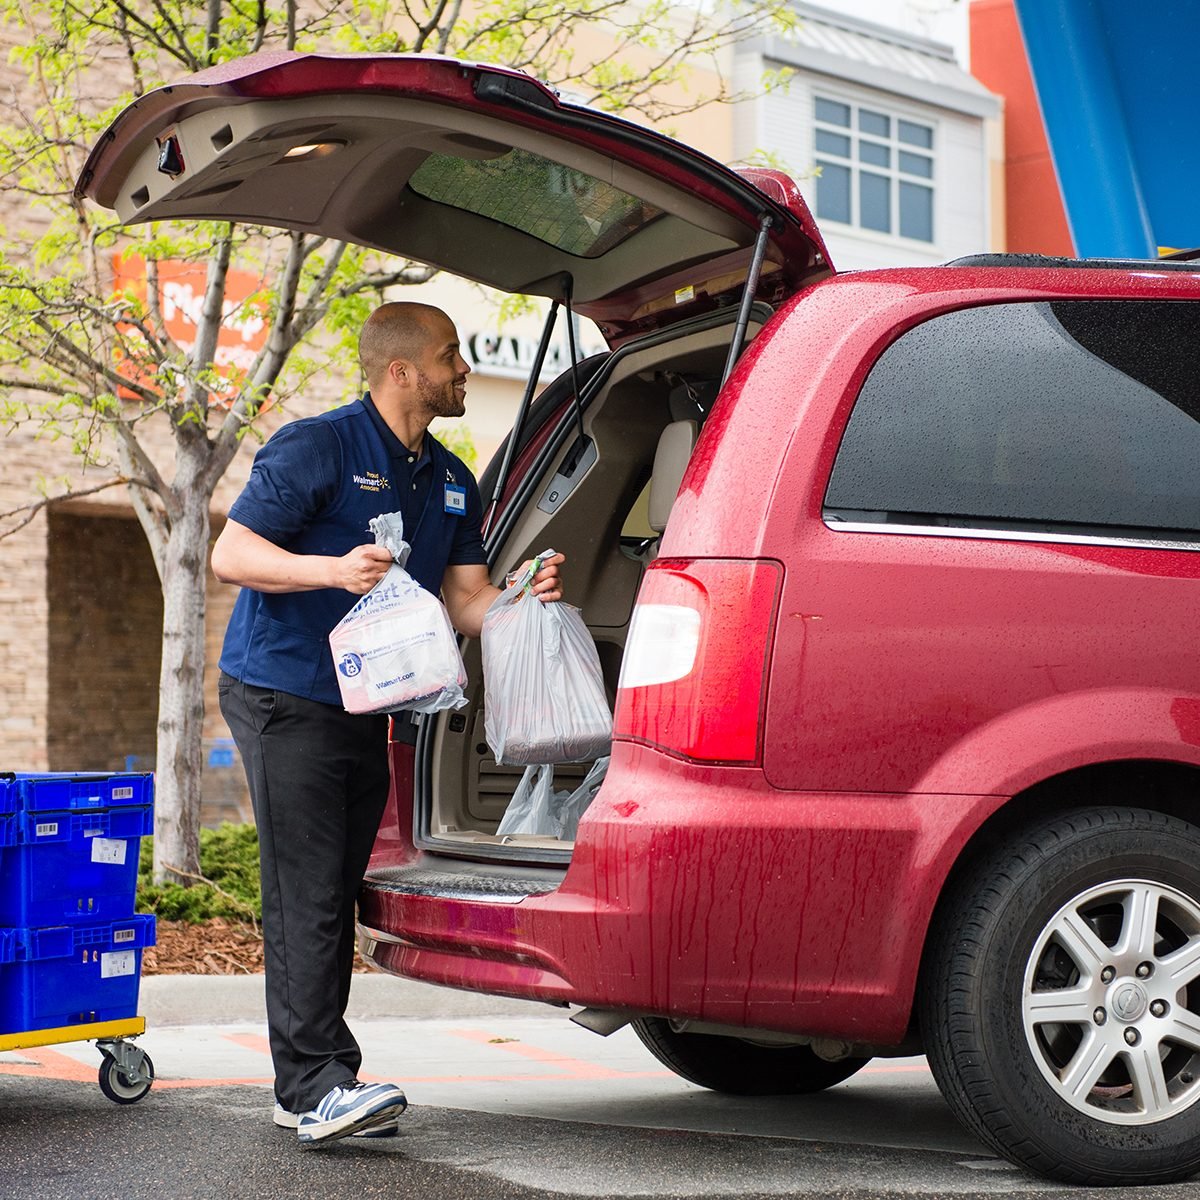 The options keep growing. Who does grocery delivery best,  Prime Now,  Instacart, Walmart or Shipt?